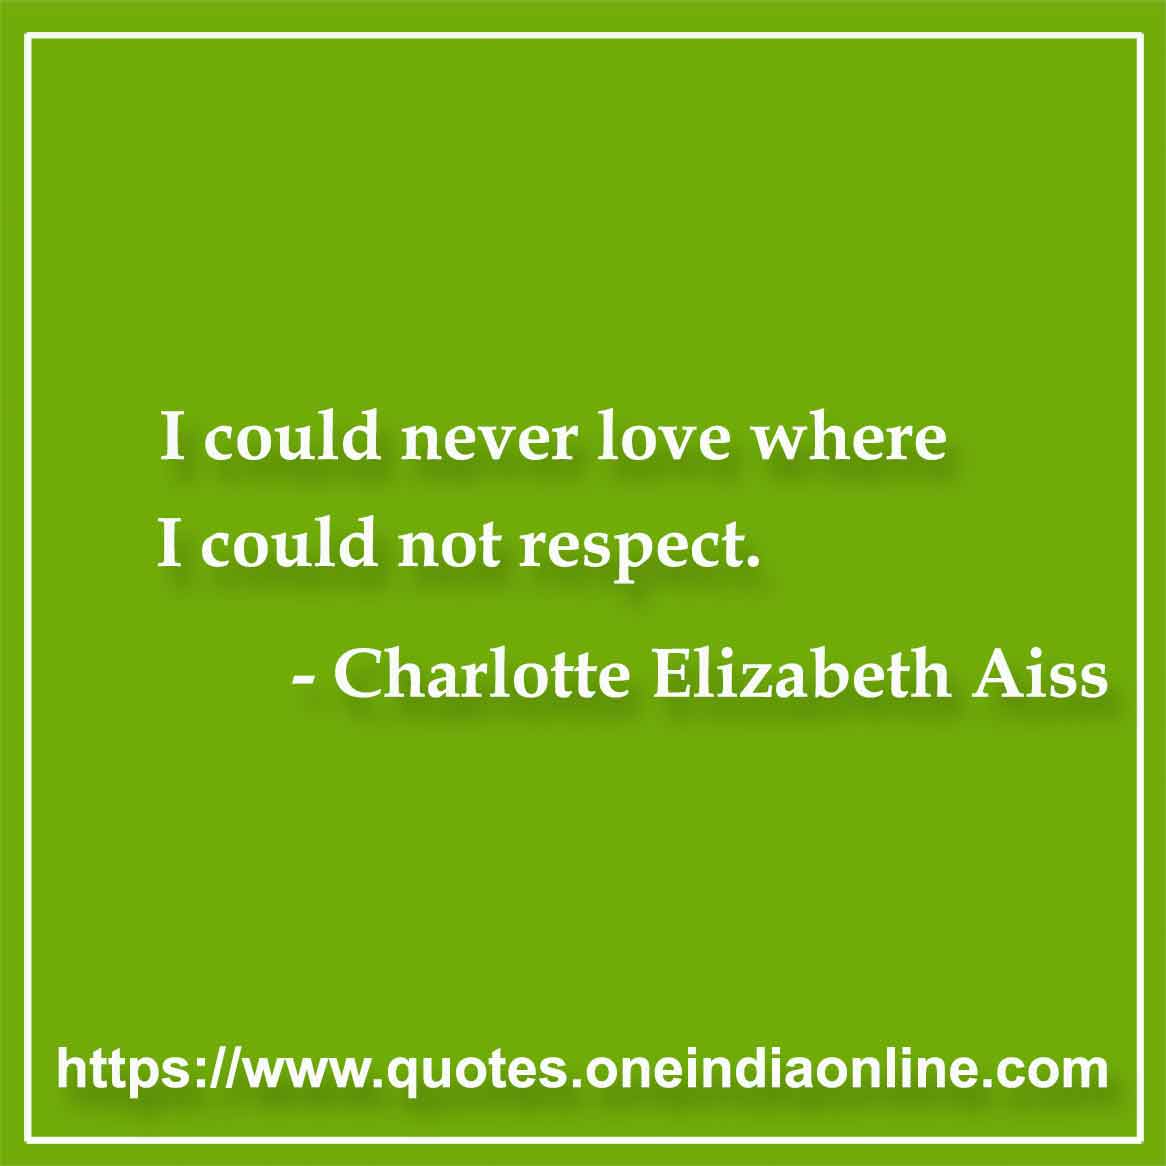 I could never love where I could not respect.

- Short Love by Charlotte Elizabeth Aiss